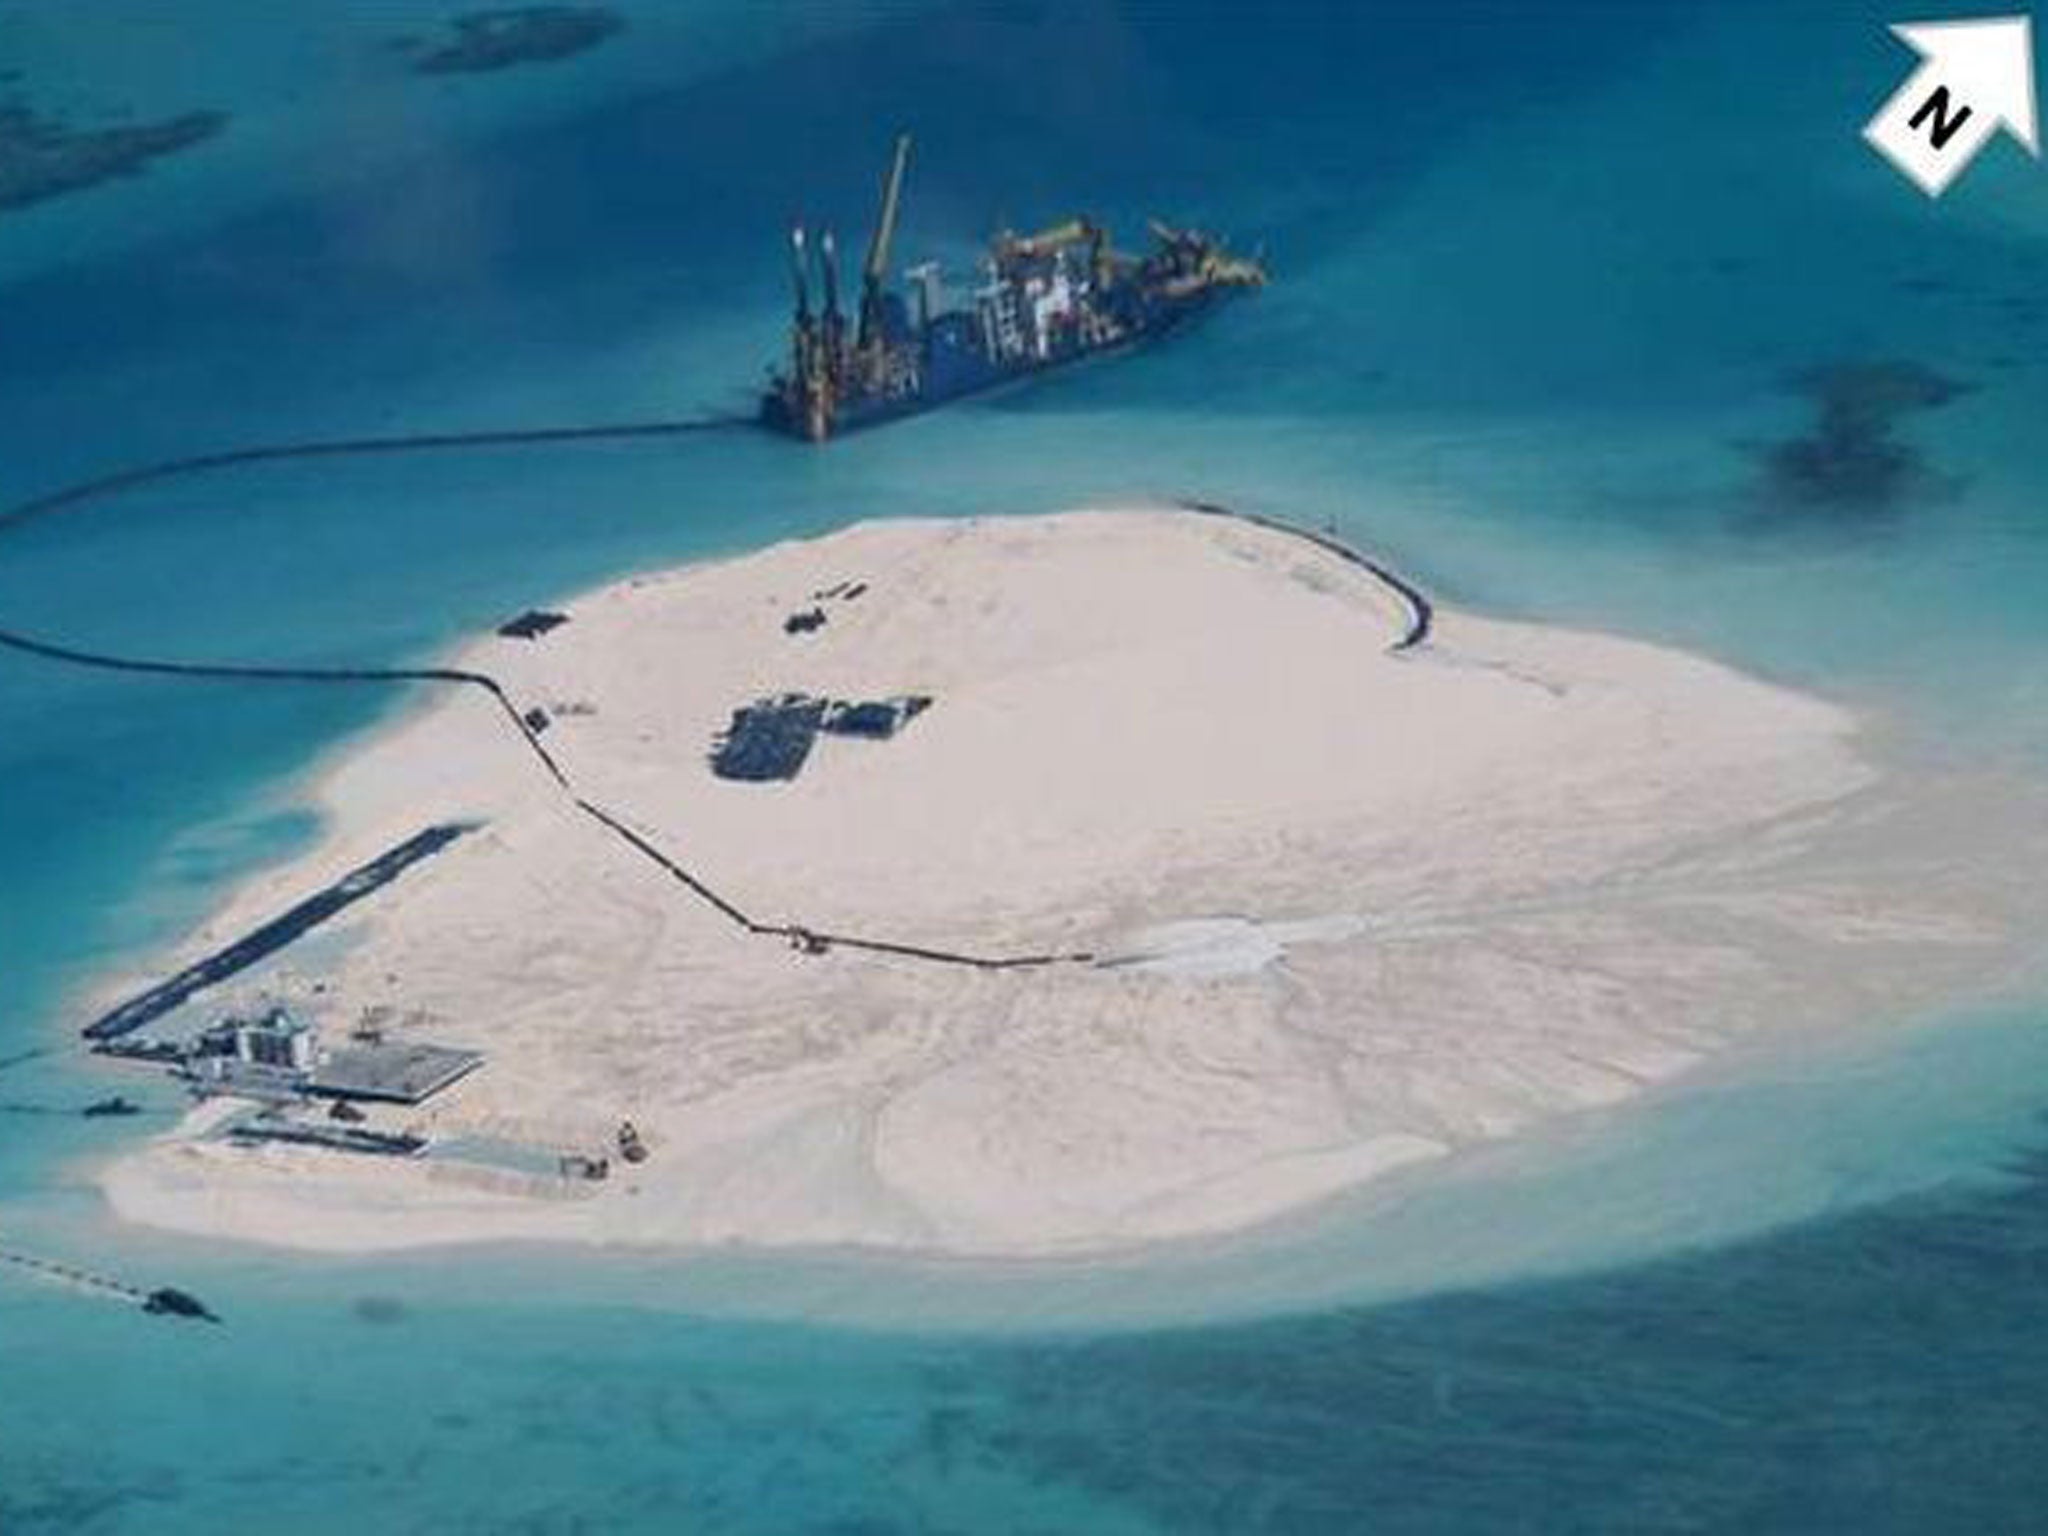 Image released by the Philippines government the alleged reclamation by China on what is internationally recognised as the Johnson South Reef in the South v2-China Sea